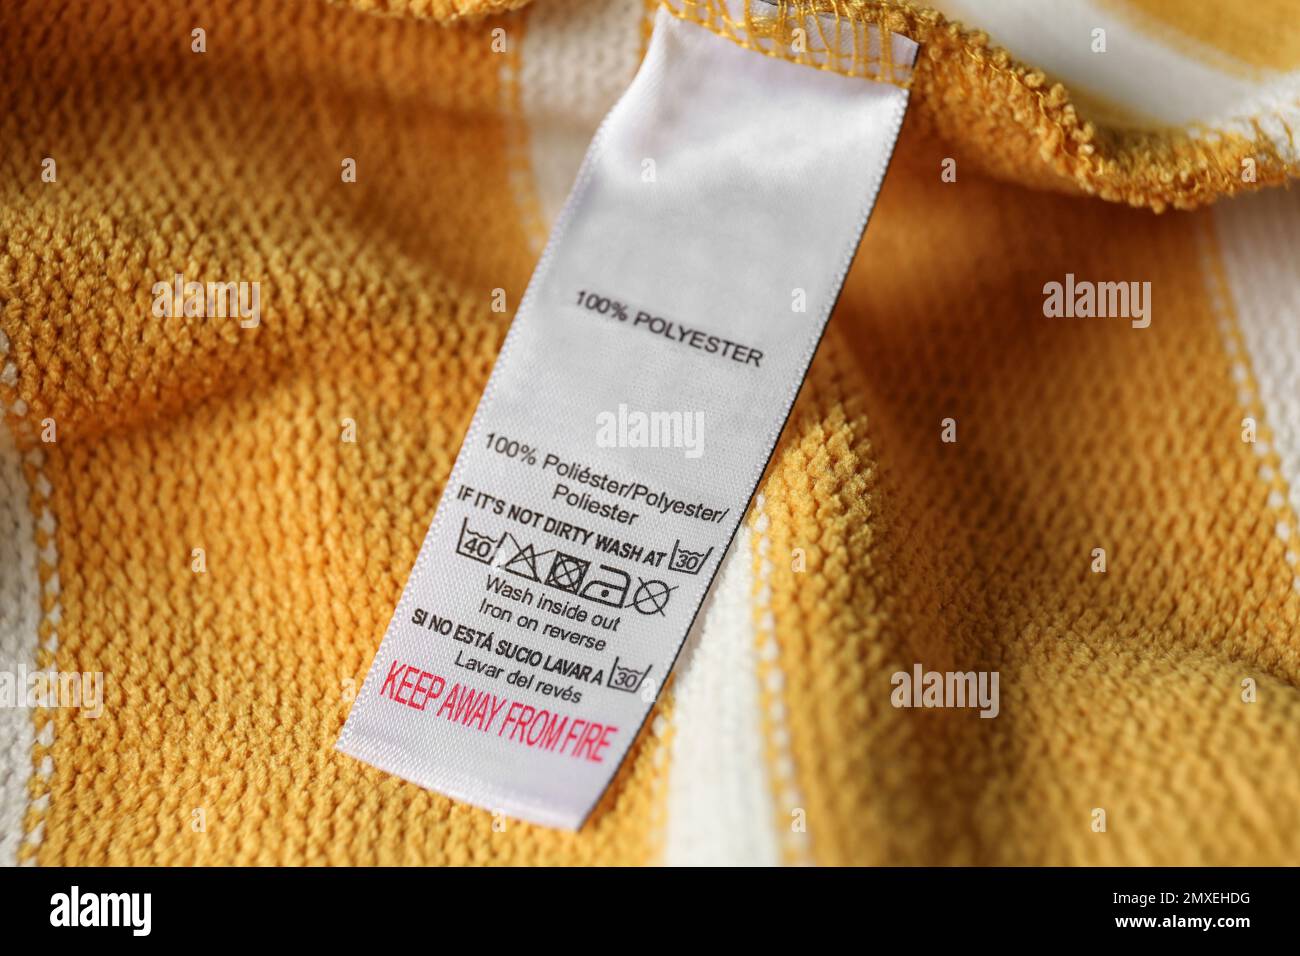 Clothing label with care symbols and material content on yellow shirt, closeup view Stock Photo